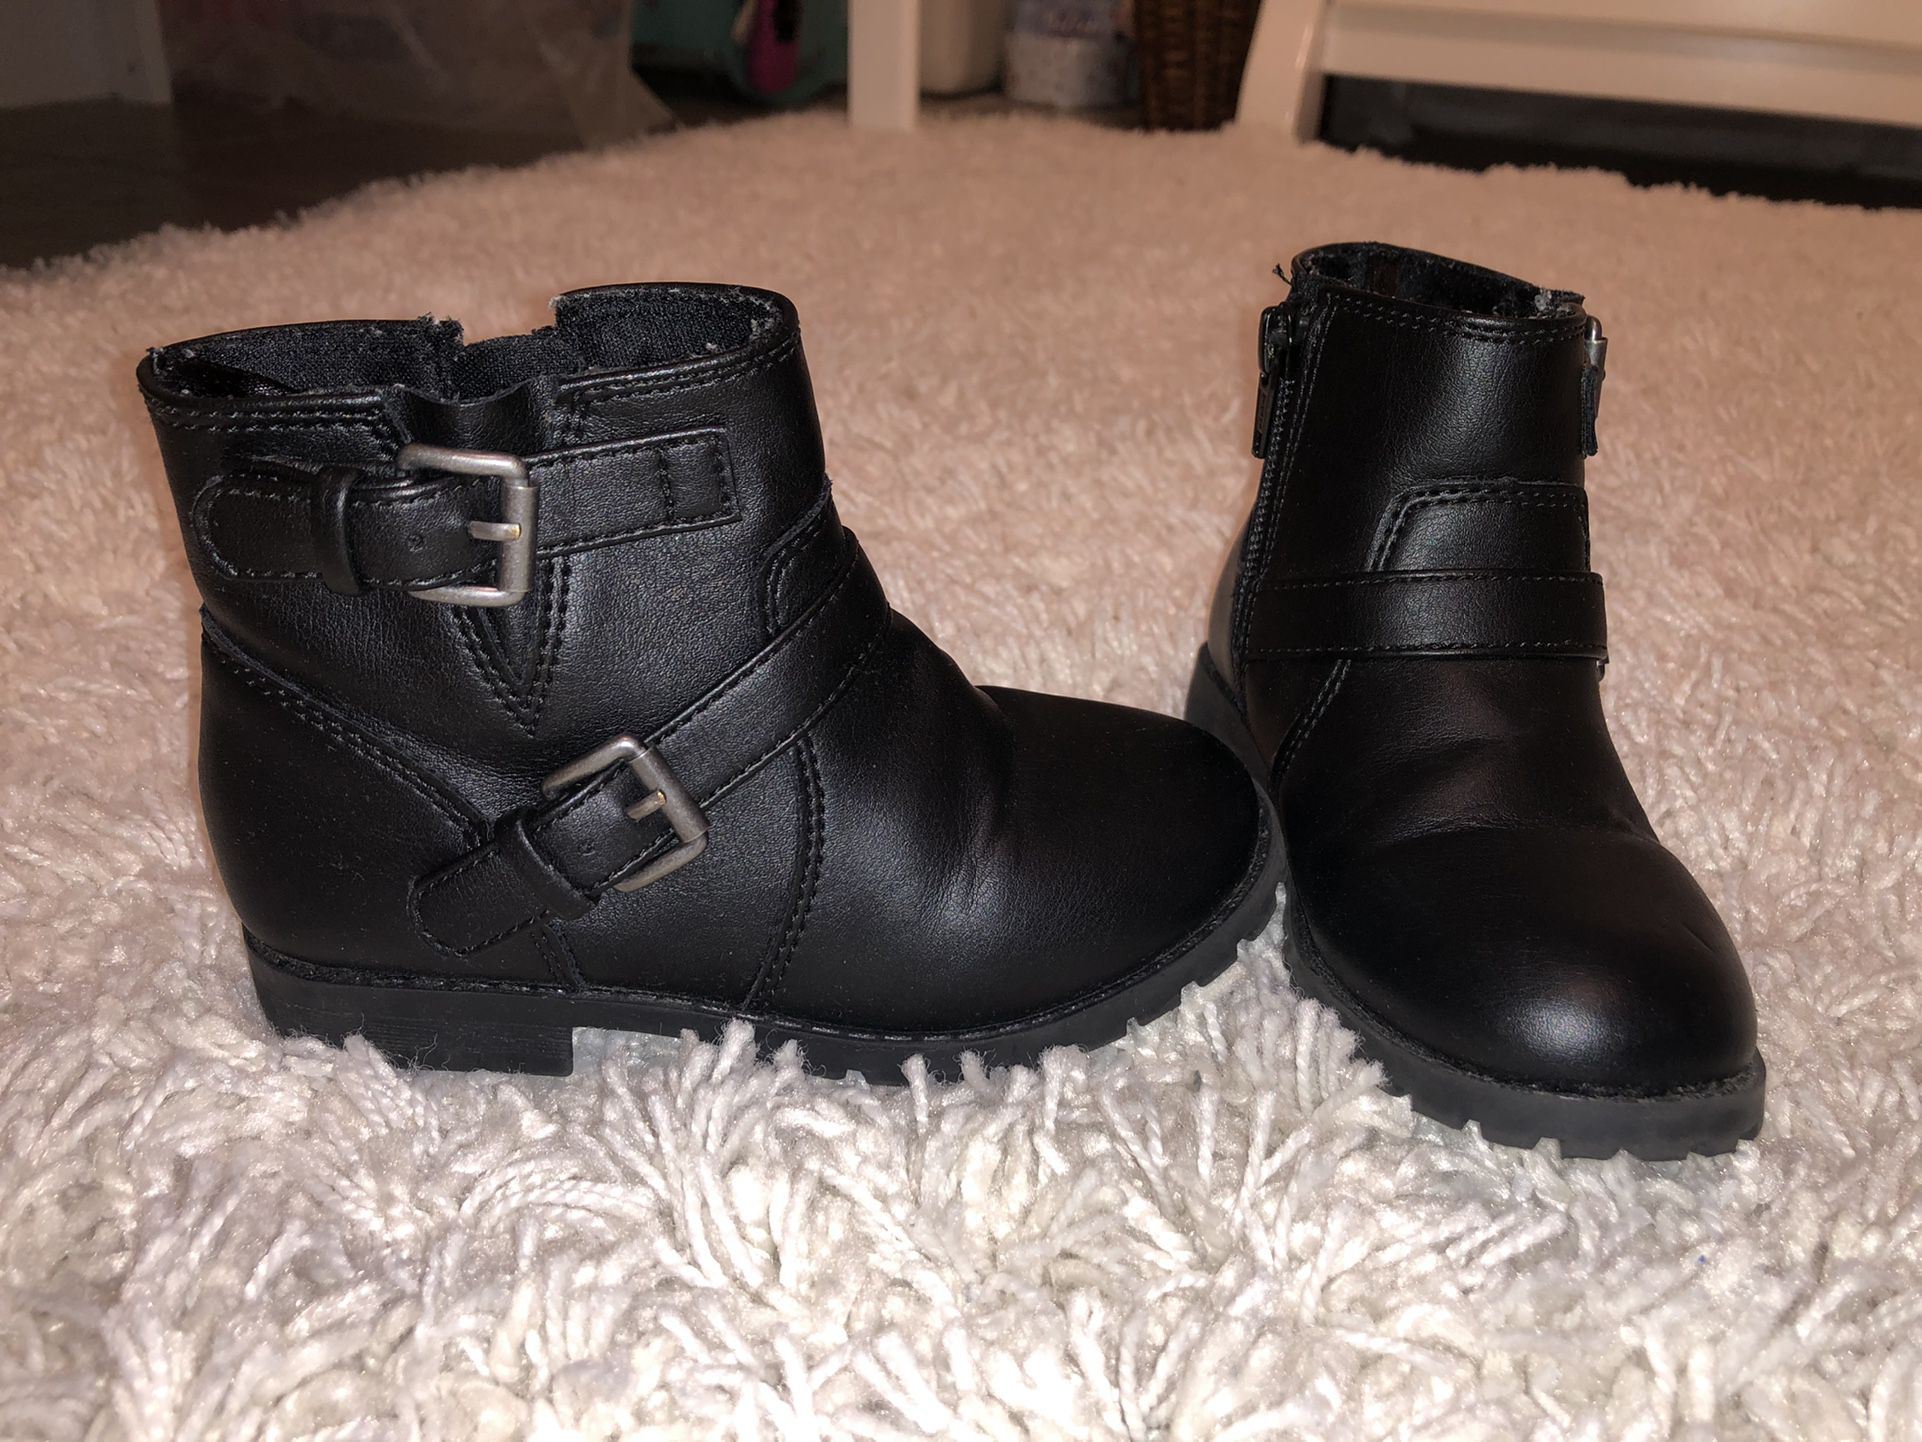 Looking New Little Girl Boots Size 9